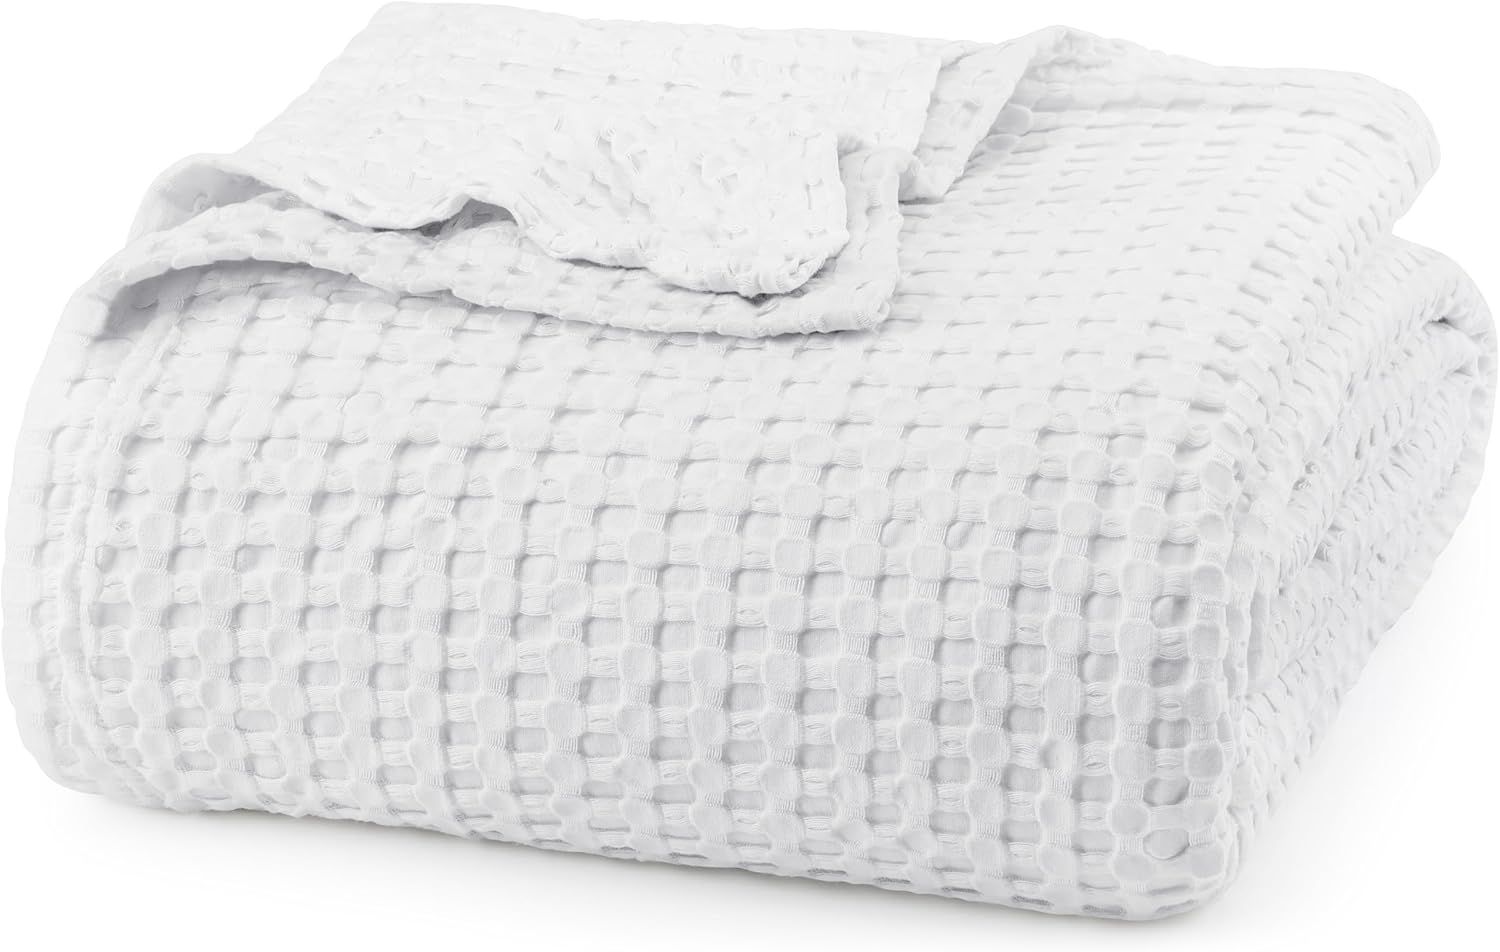 Utopia Bedding Cotton Waffle Blanket 300 GSM (White - 90x108 Inches) Soft Lightweight Breathable ... | Amazon (US)